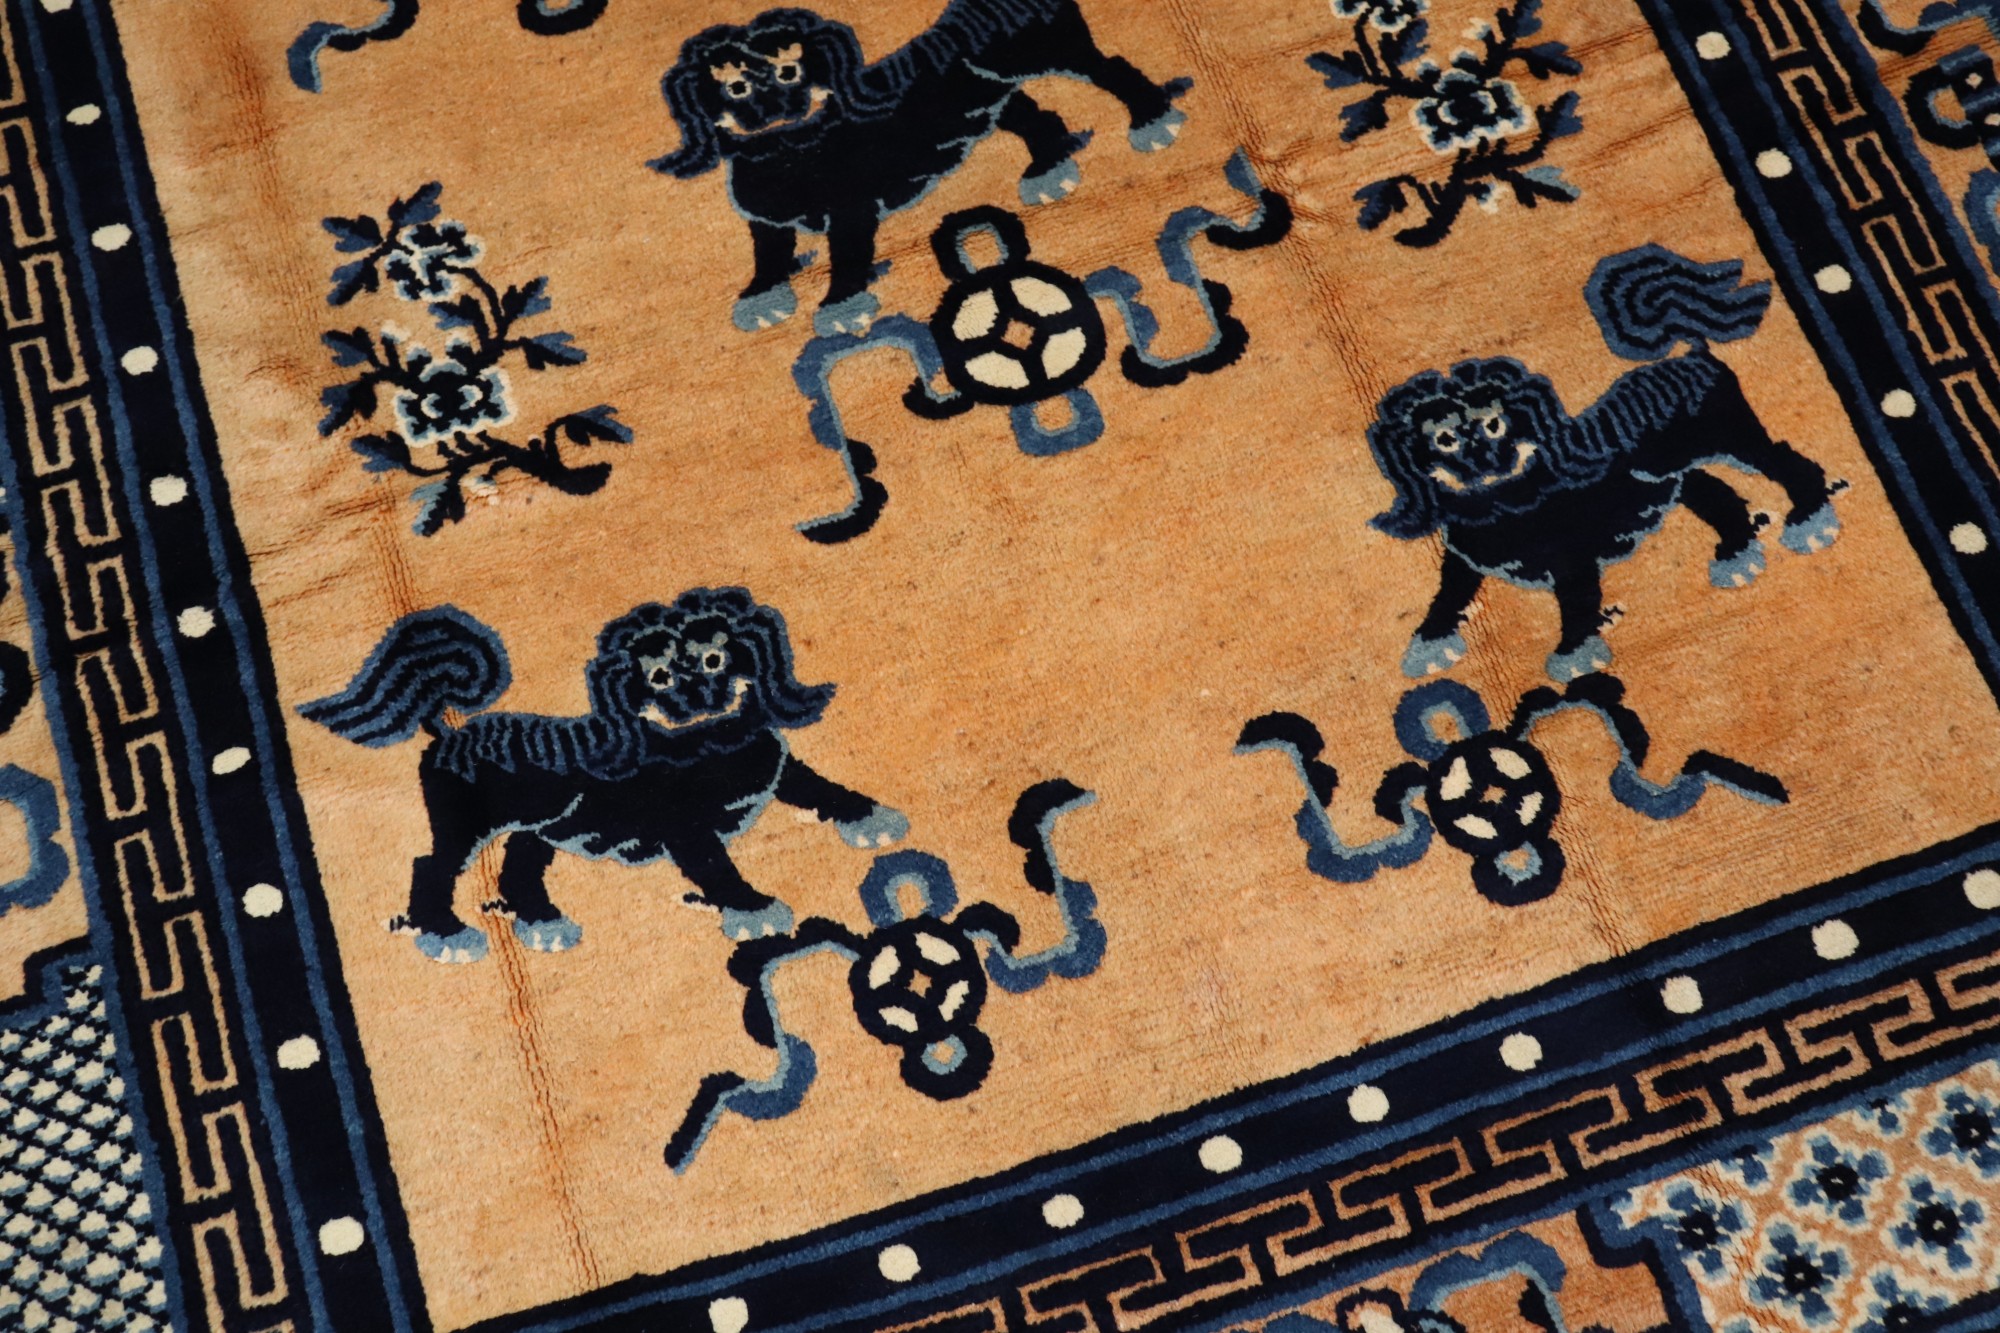 Pictorial Chinese Foo Dog Area Rug 71791 Nazmiyal Antique Rugs